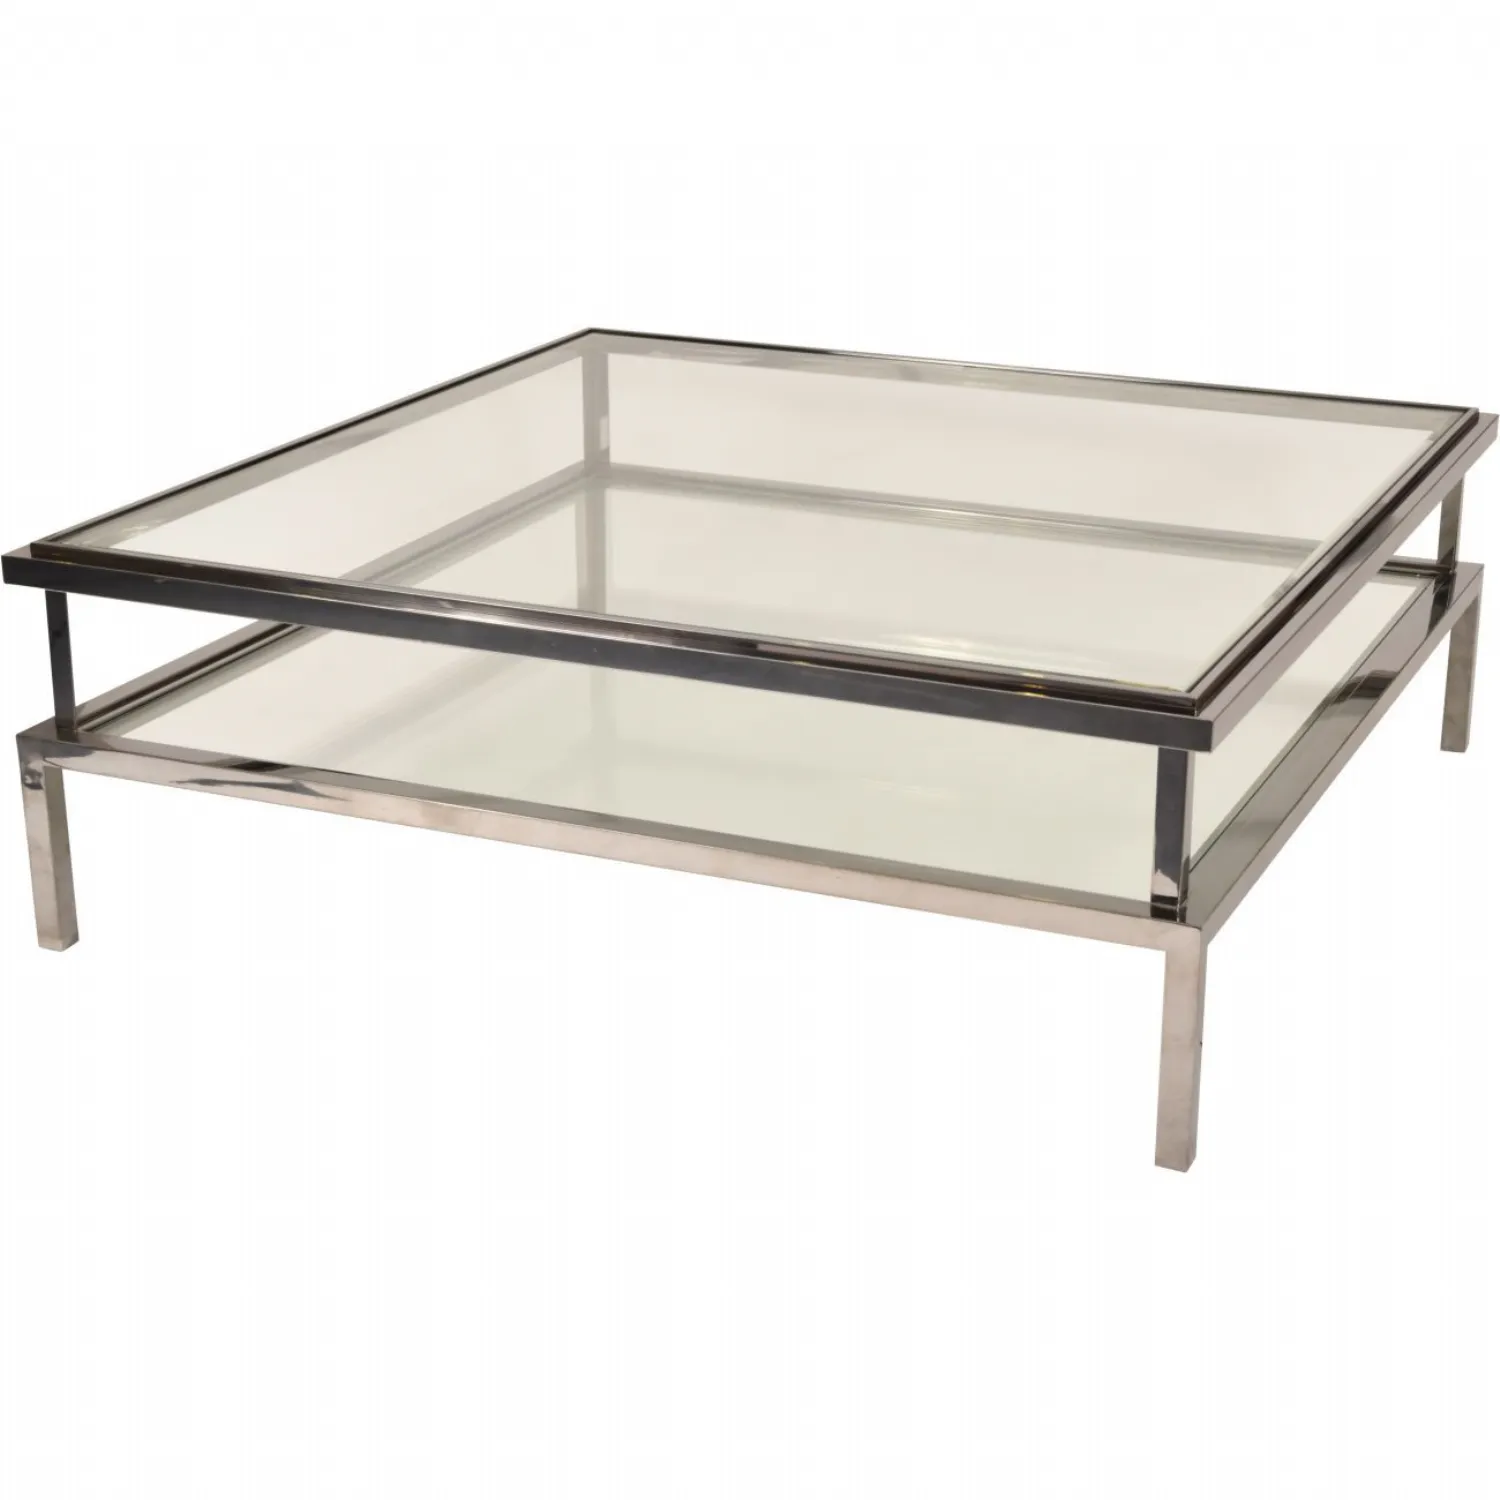 Black Stainless Steel and Glass 2 Tier Large Coffee Table